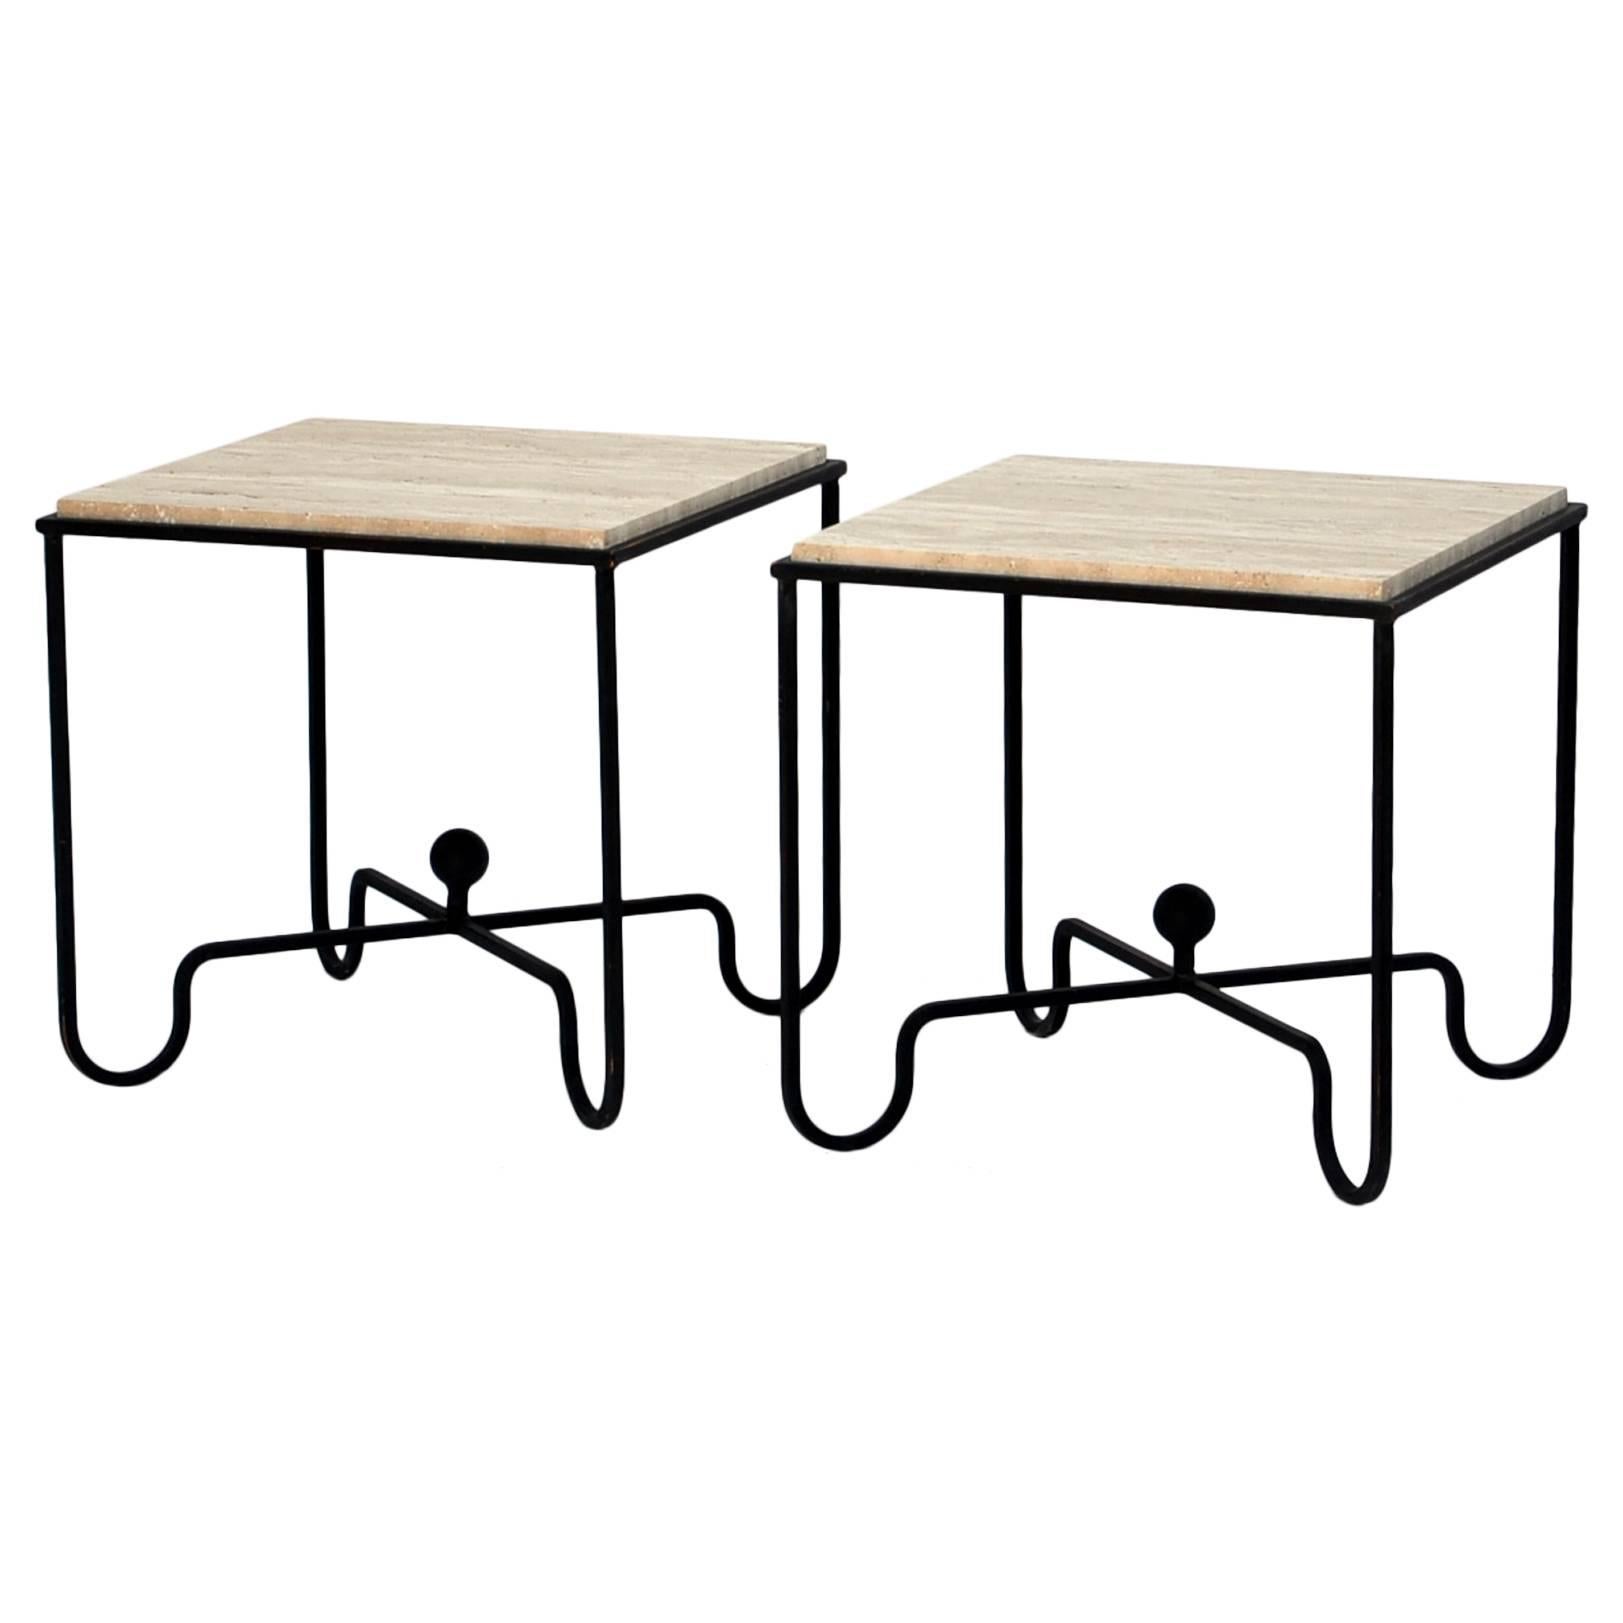 Pair of Wrought Iron and Travertine Side Tables after Mathieu Matégot